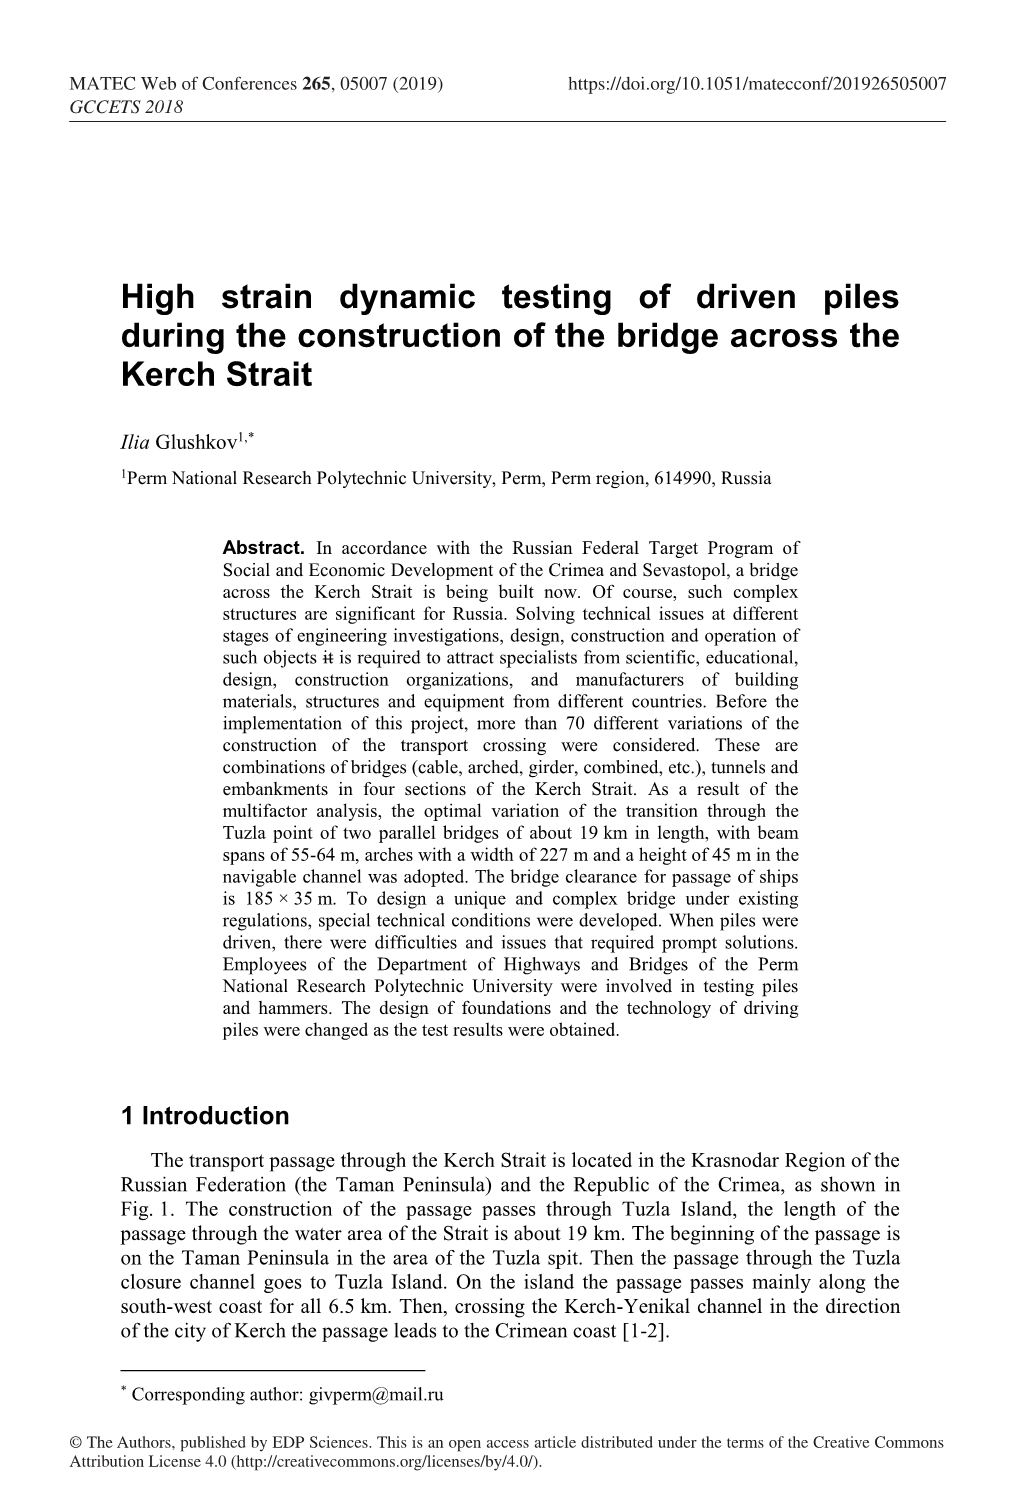 High Strain Dynamic Testing of Driven Piles During the Construction of the Bridge Across the Kerch Strait